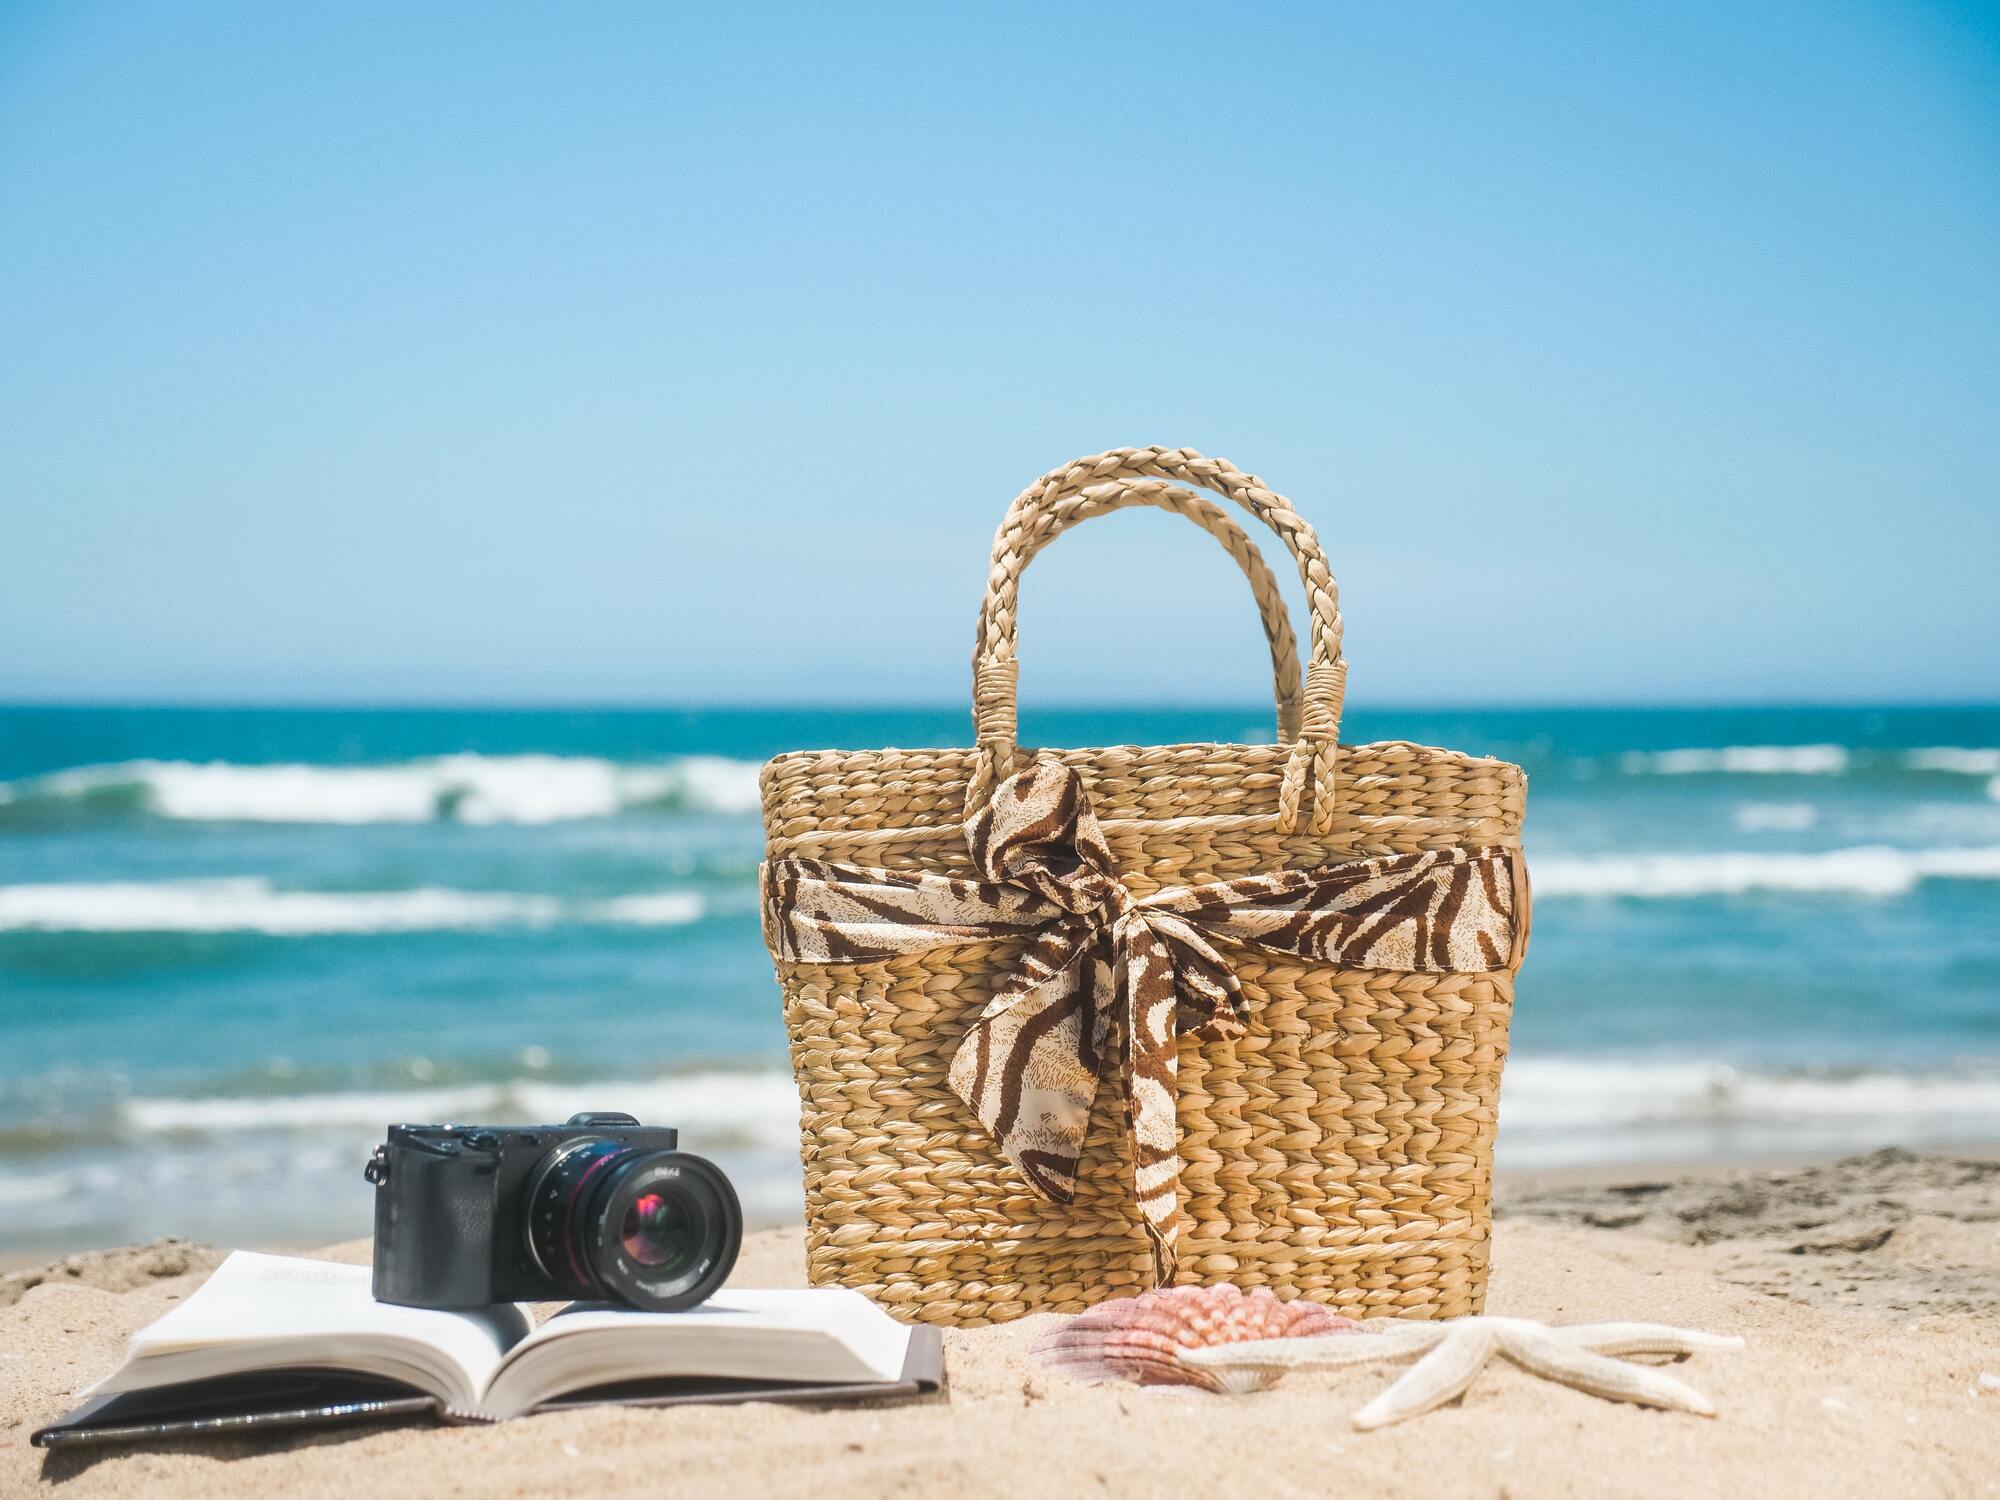 Exceptionally stylish: three best beach bags that will create a wow effect. Photo